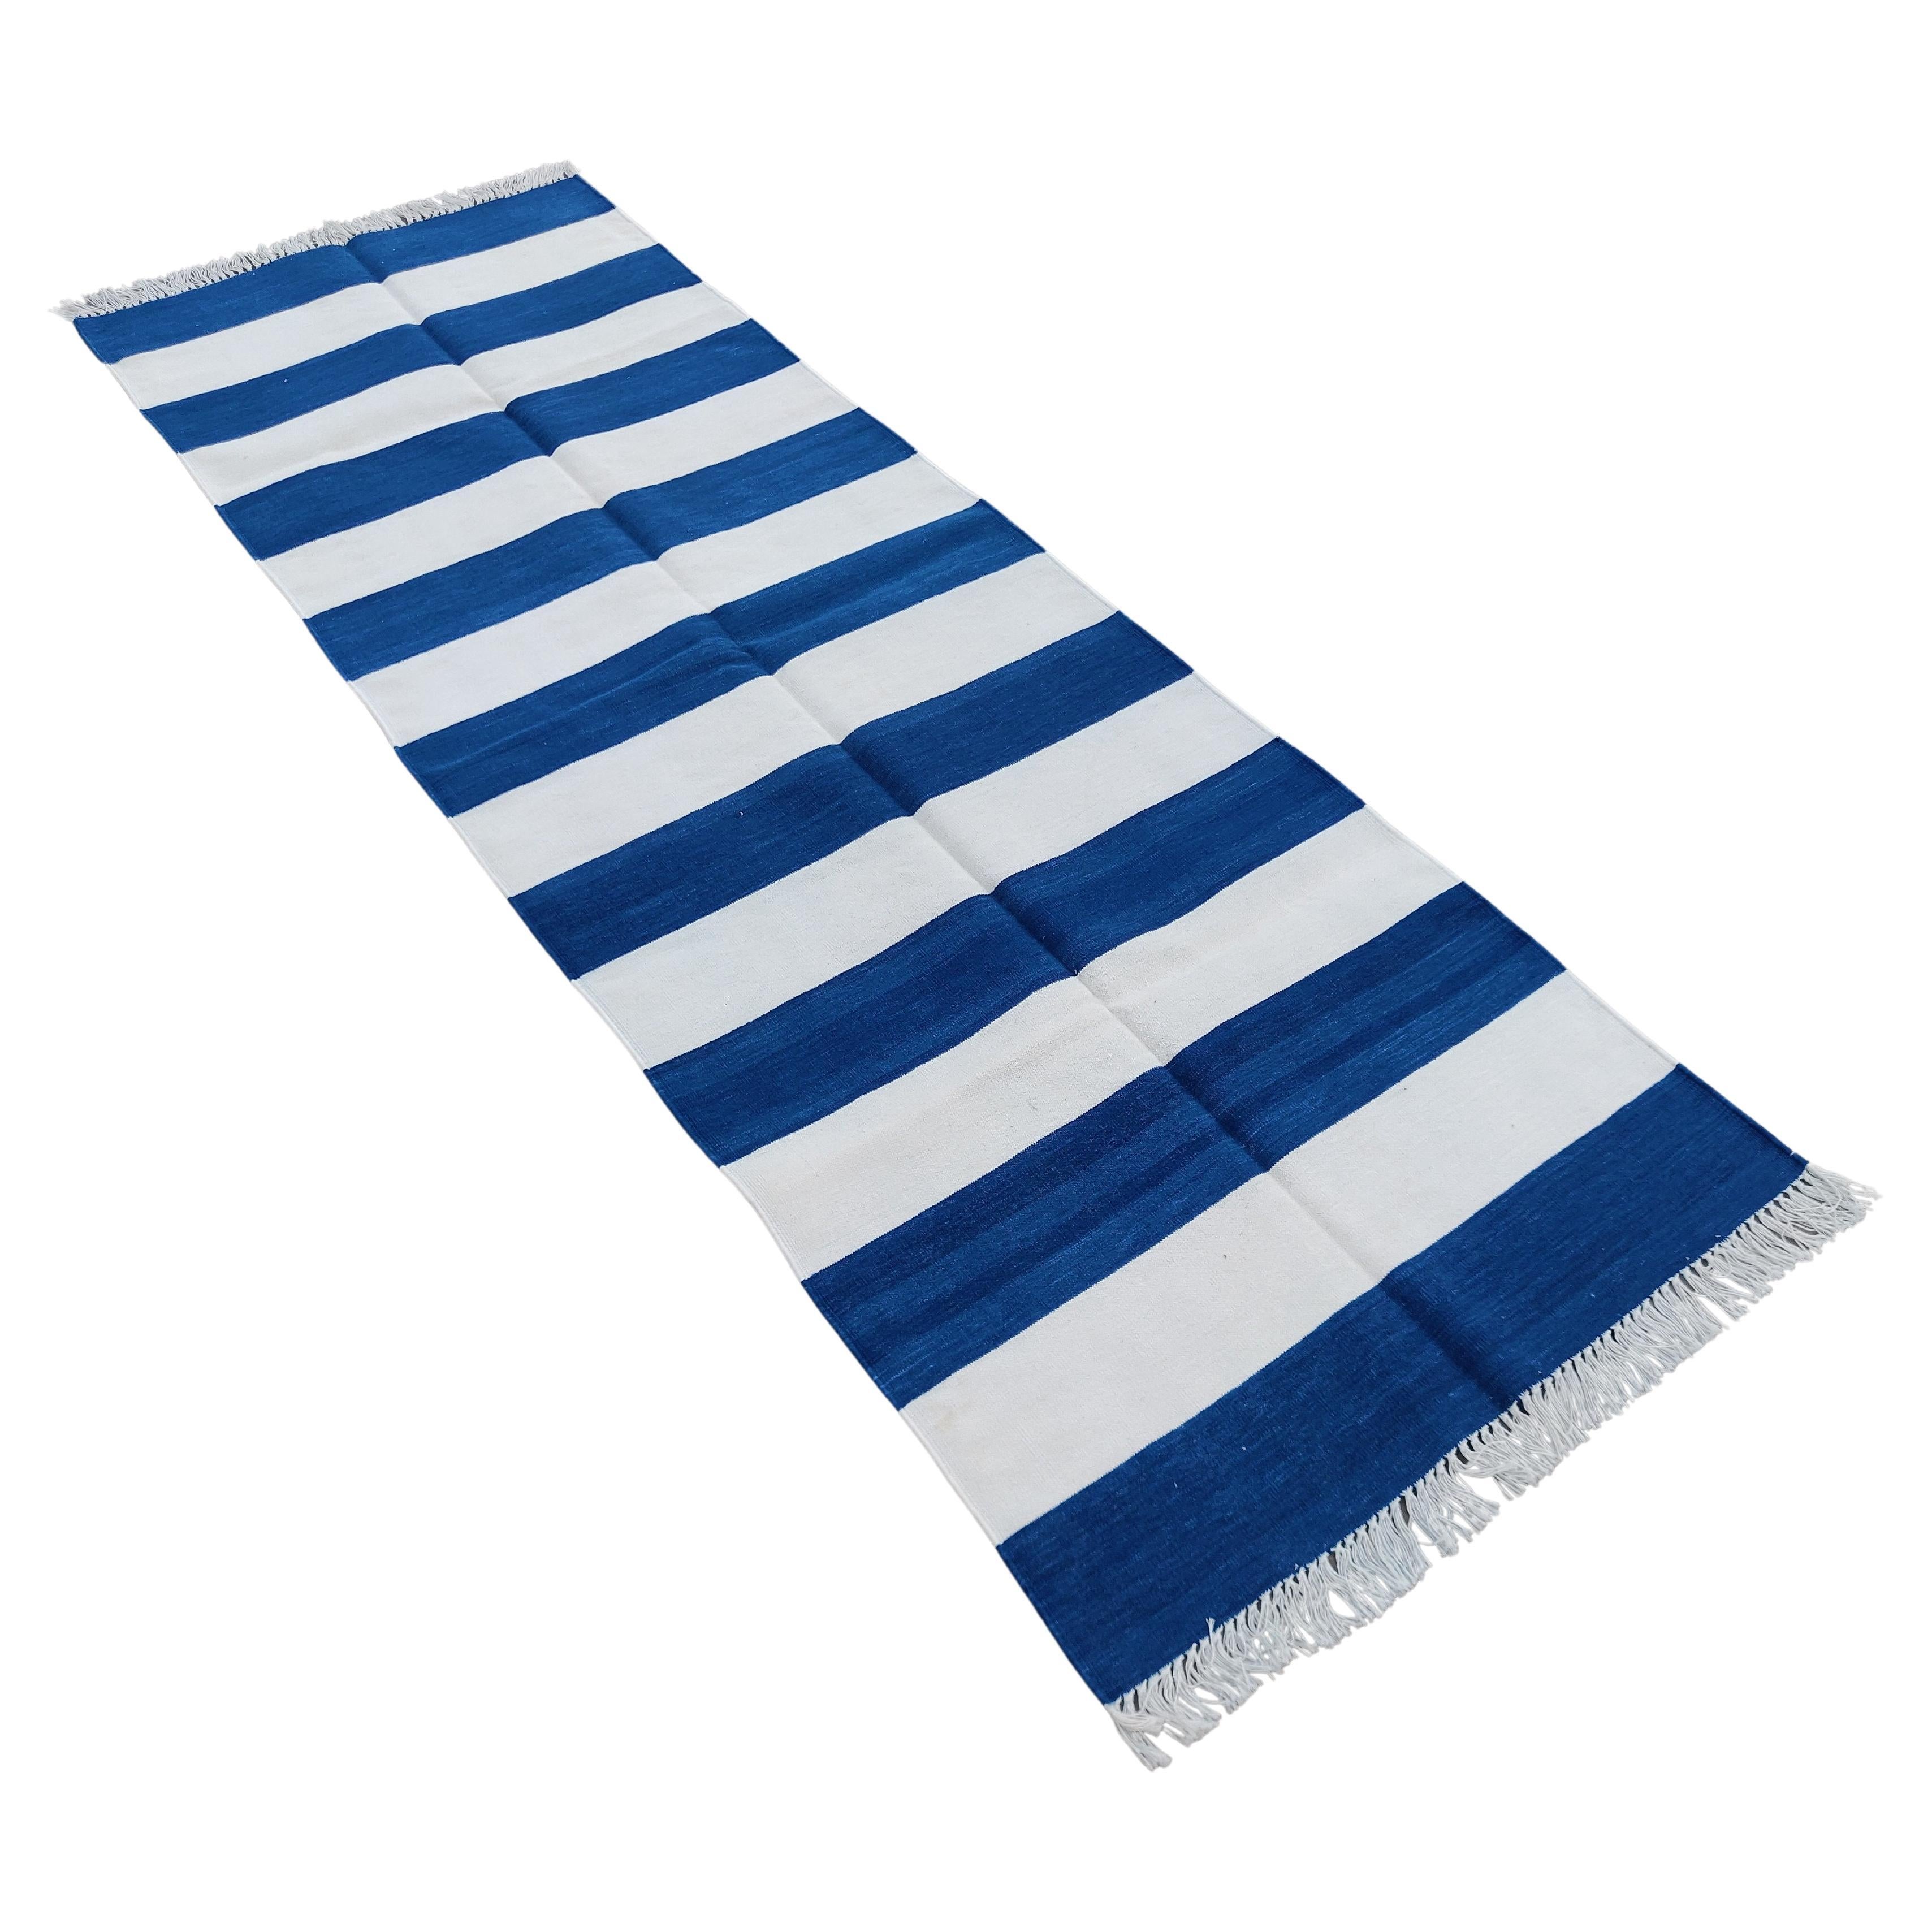 Handmade Cotton Area Flat Weave Runner, 2.5x8 Blue, White Striped Indian Dhurrie For Sale